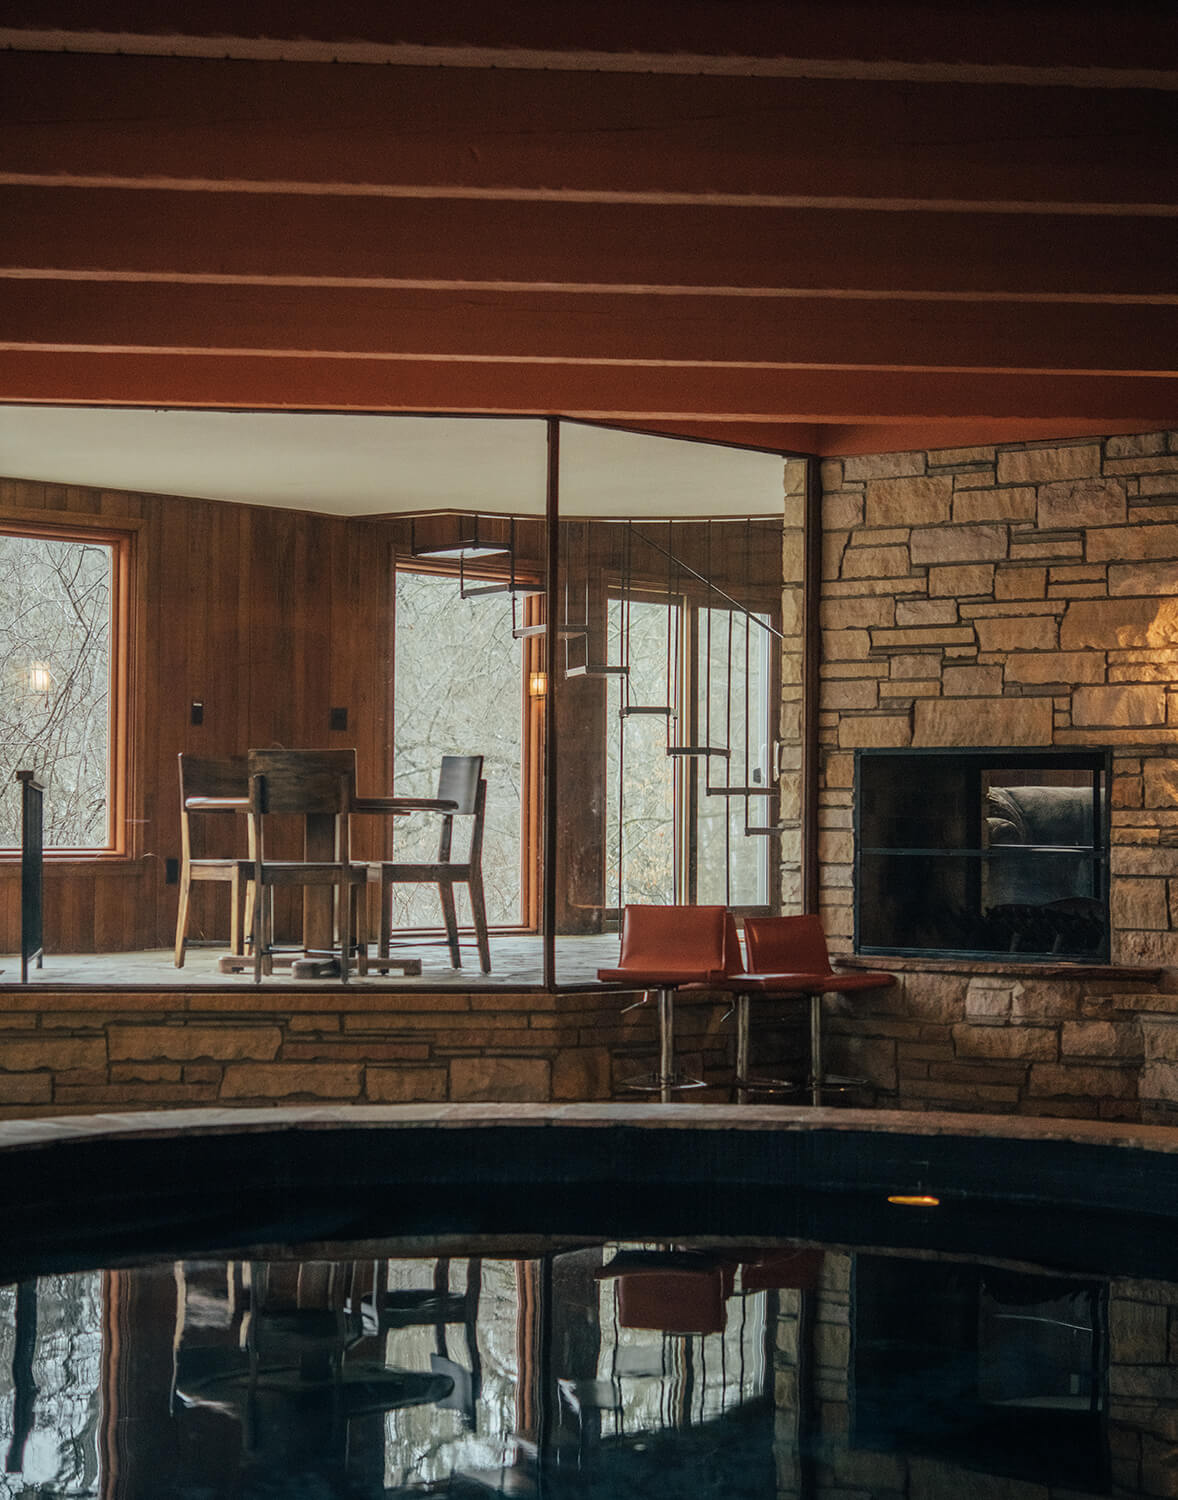 A mid-century modern home with an indoor pool.